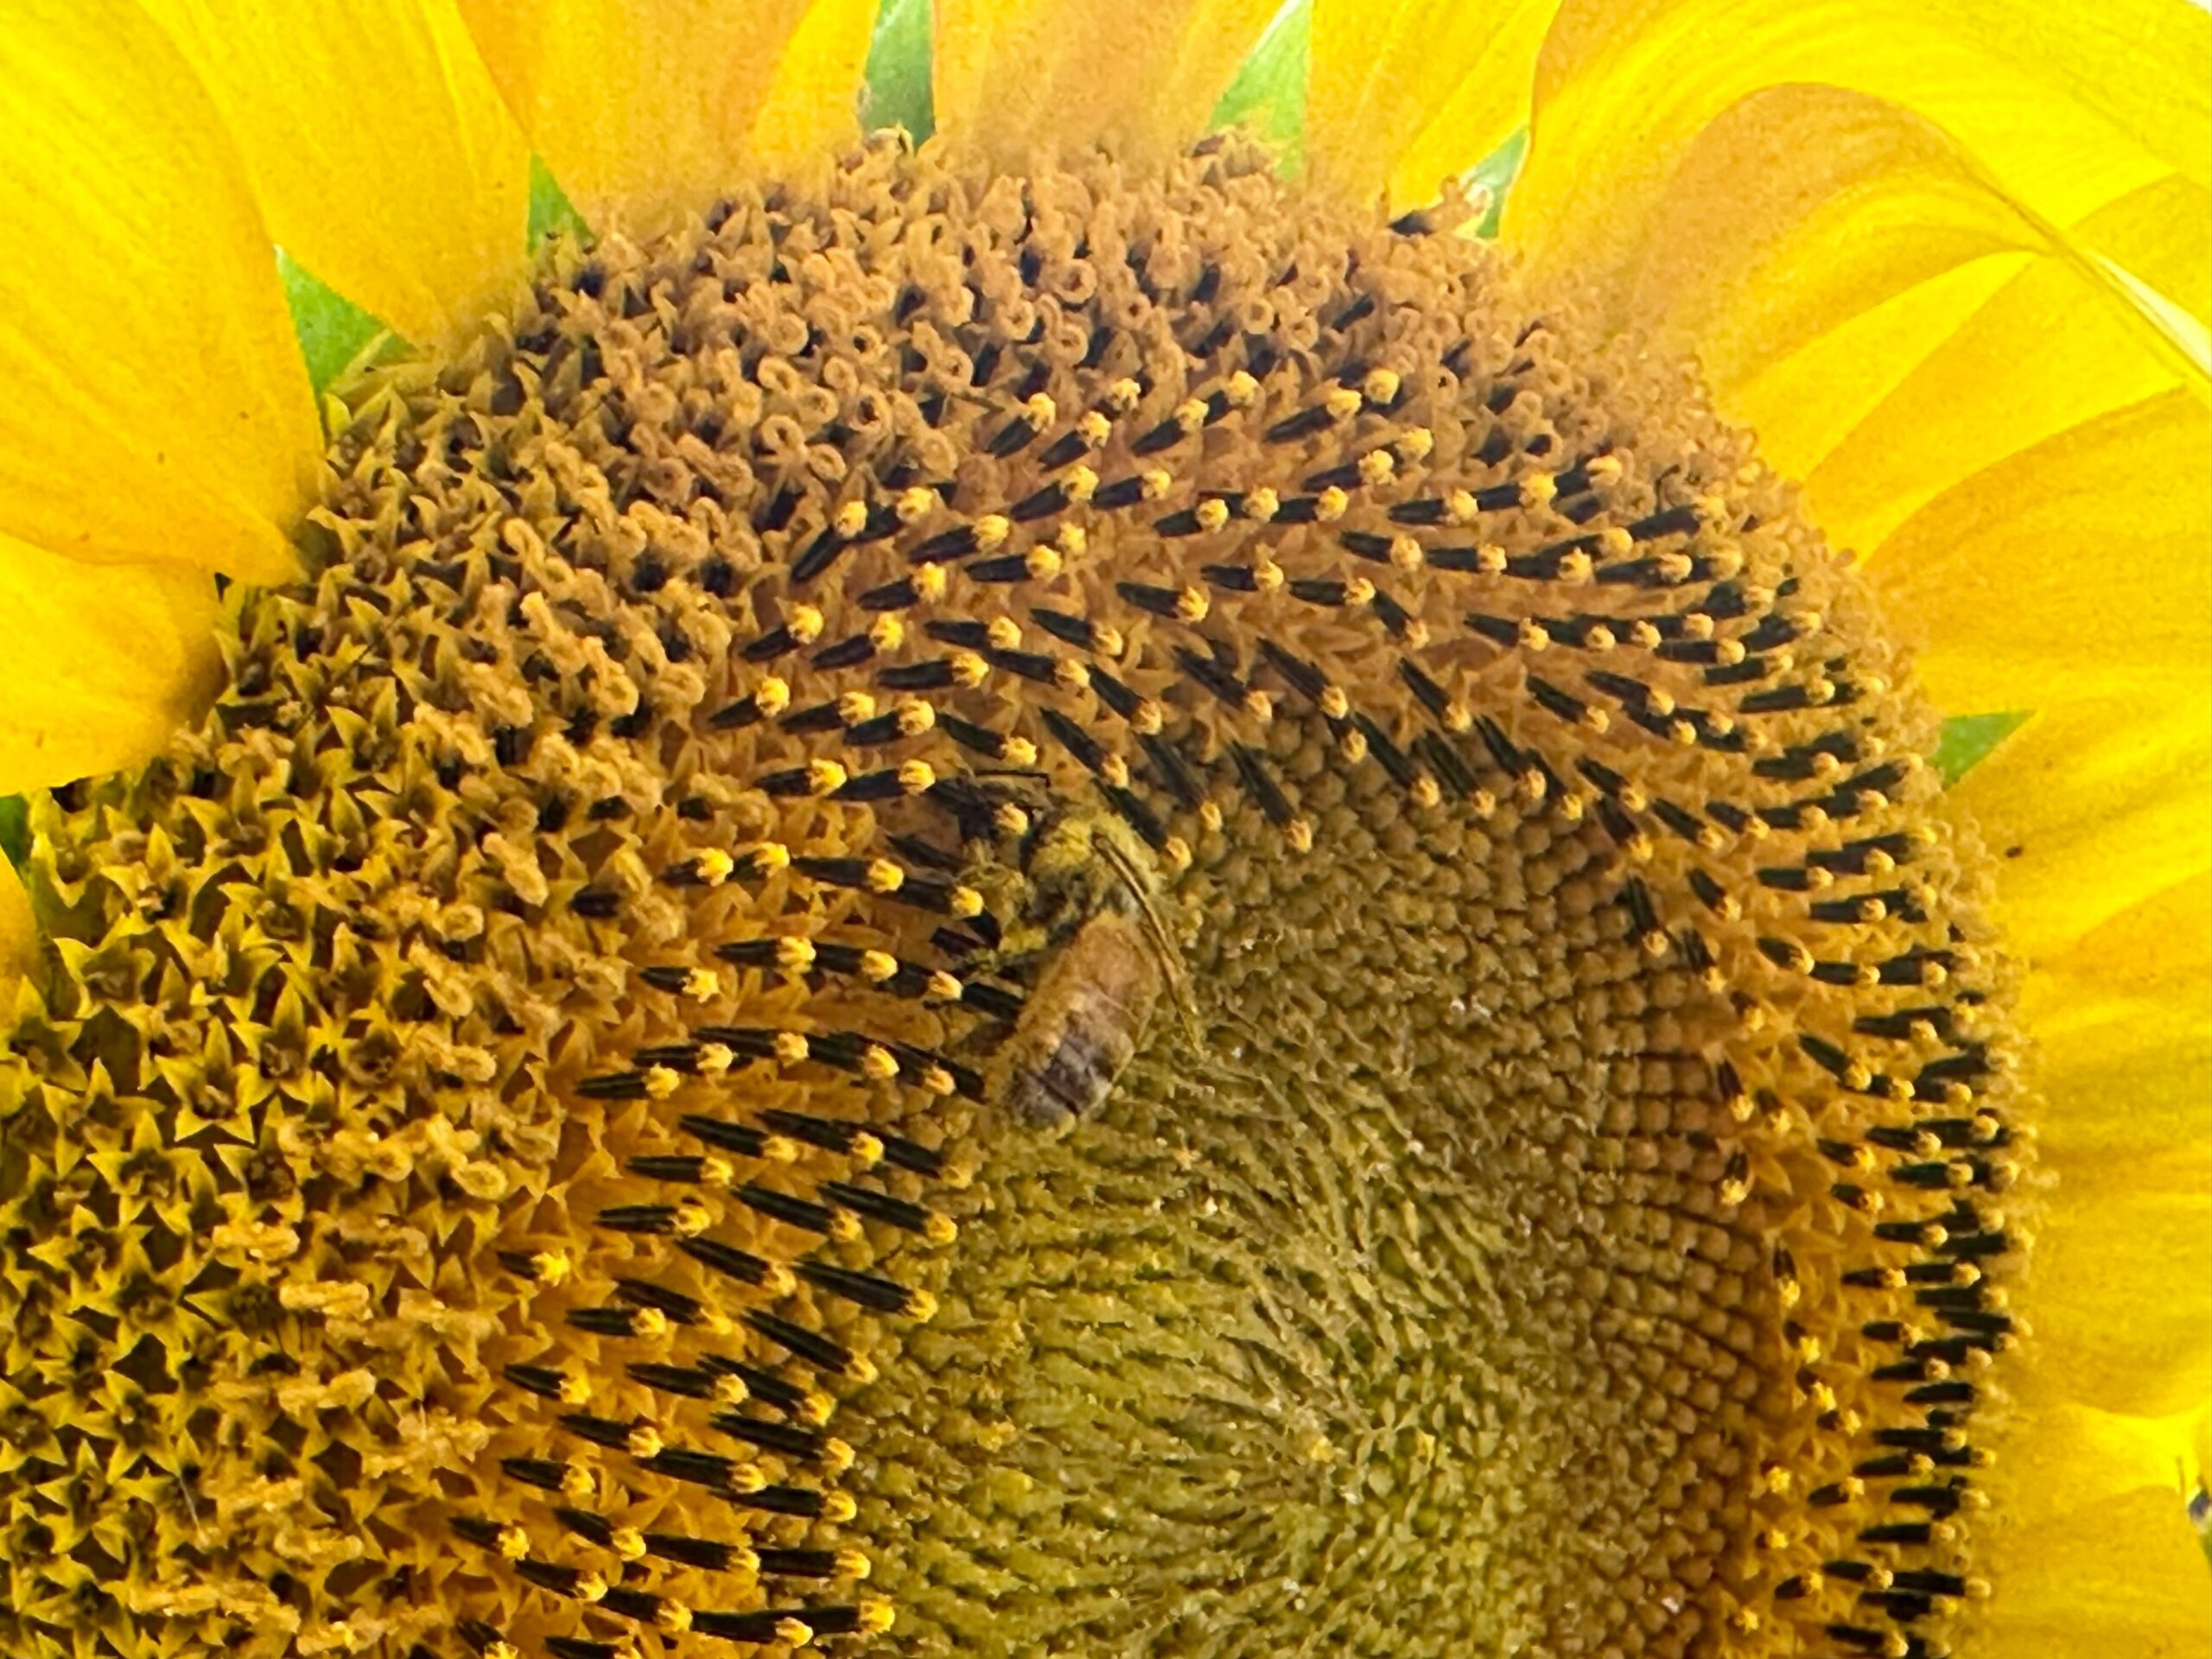 Close-up of a bee on a large sunflower